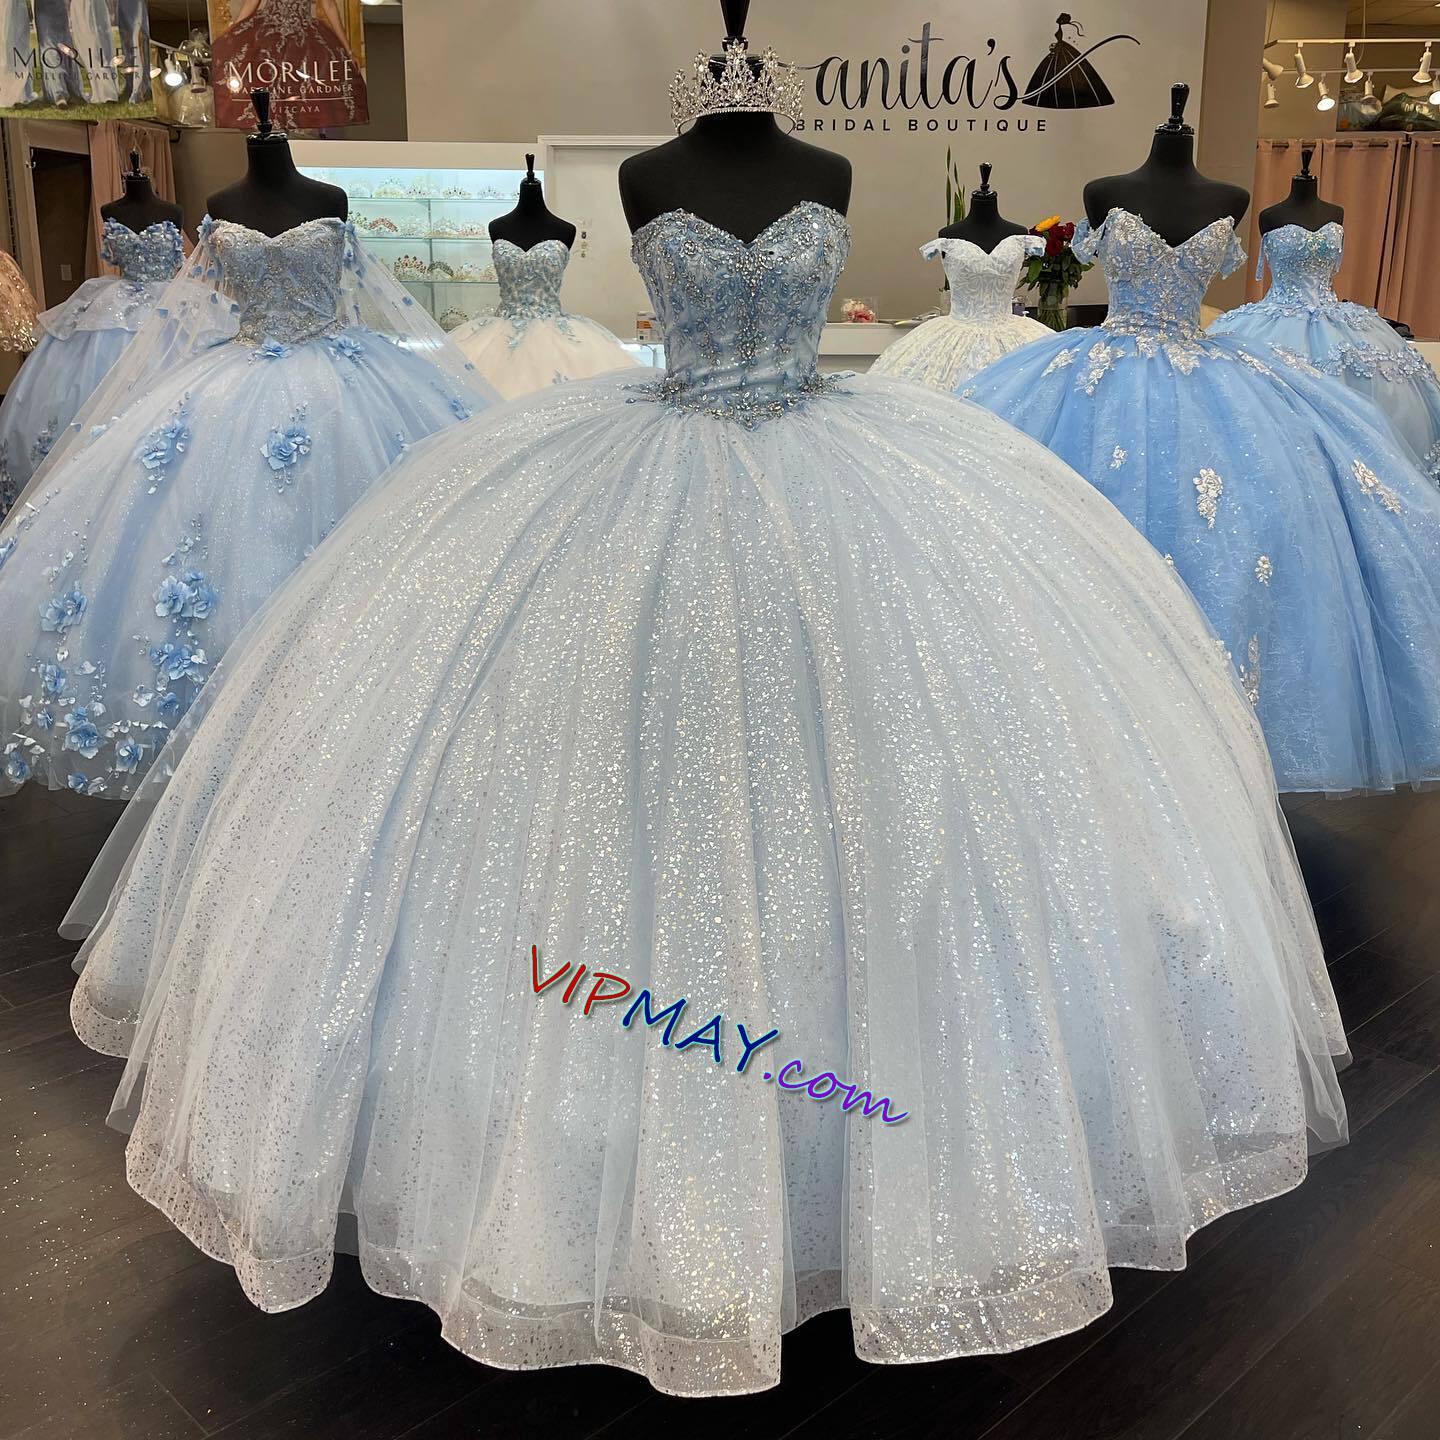 affordable quinceanera dress,glitter tulle quinceanera dress,strapless sweetheart quinceanera dress,sweetheart quinceanera dress,quinceanera dress with cape,cheap light blue formal dress,light blue quinceanera dress,wholesale quinceanera dress factory,corset quinceanera dress,